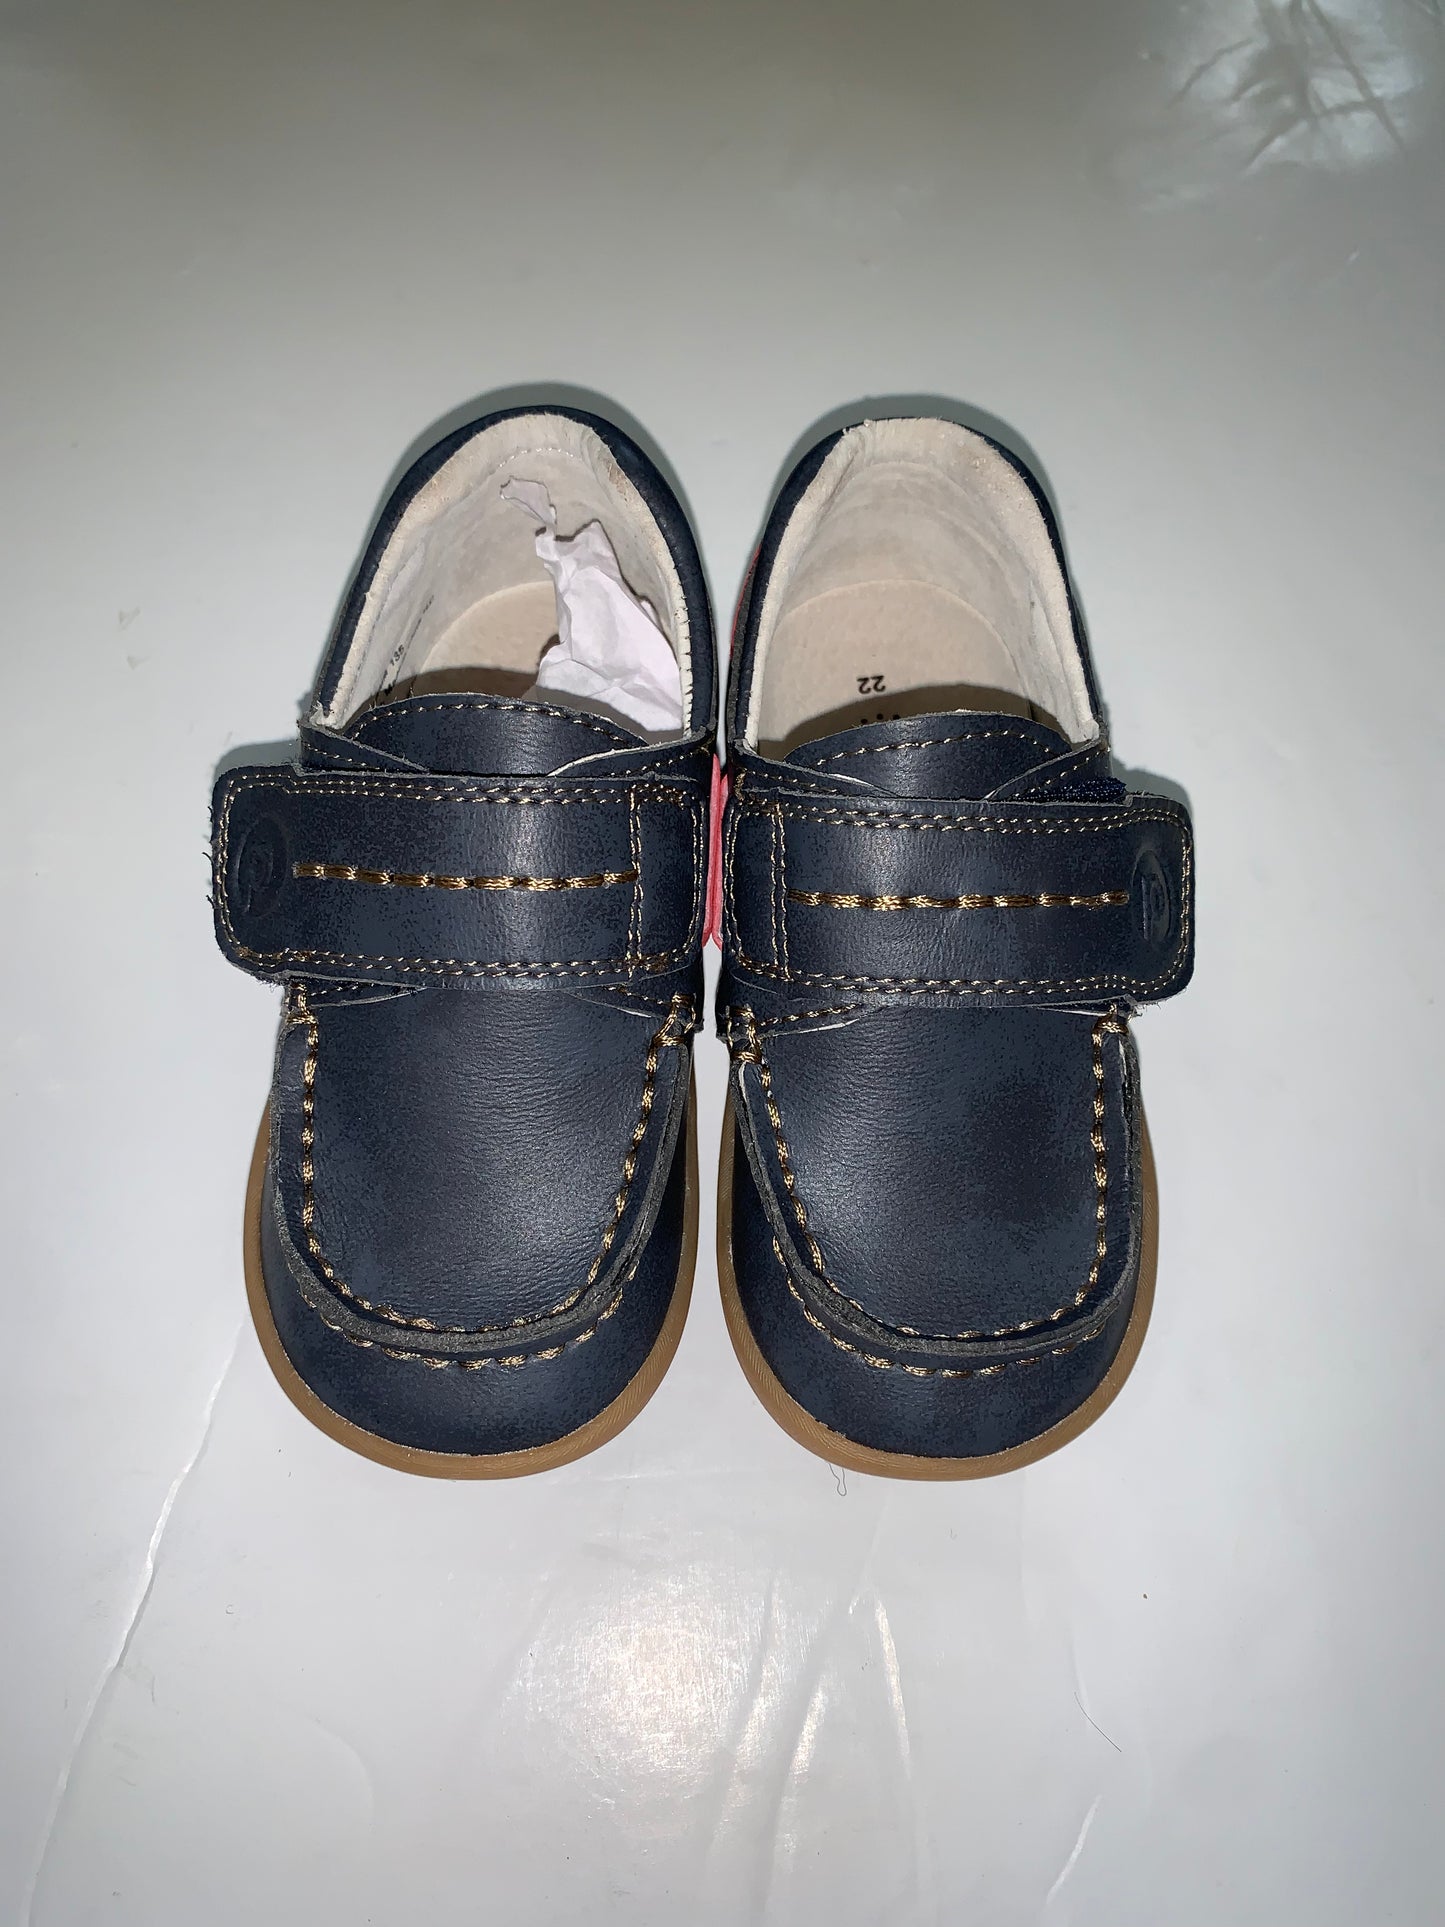 Pediped grip and go bots loafer summer shoe